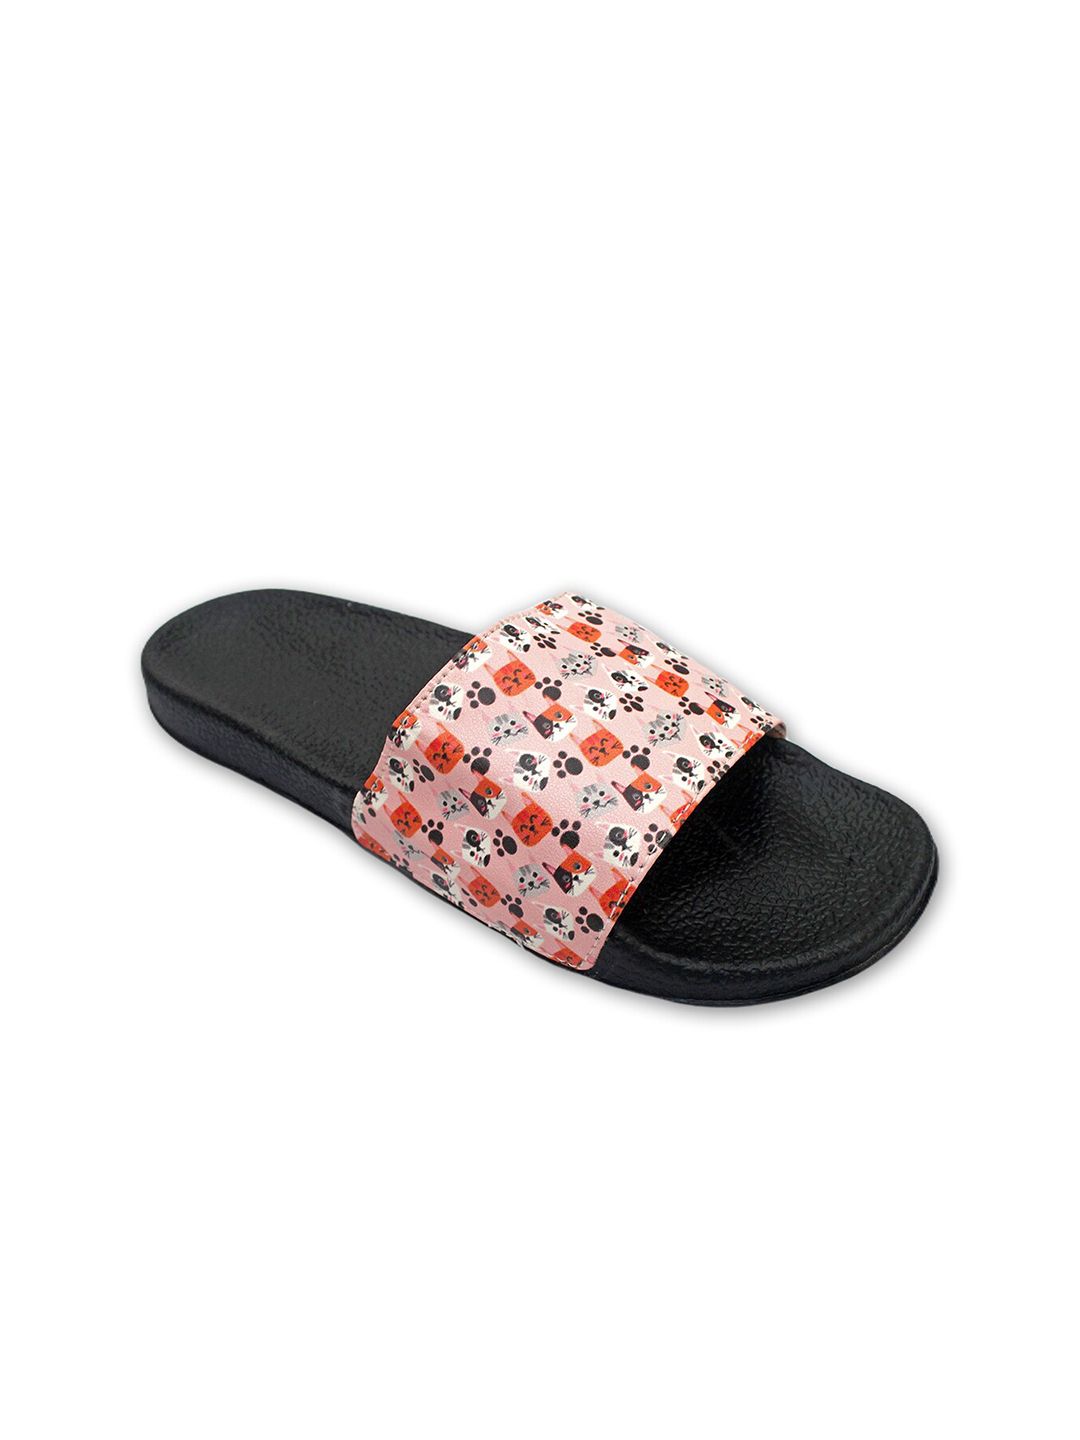 ADIVER Women Pink & Red Printed Sliders Price in India